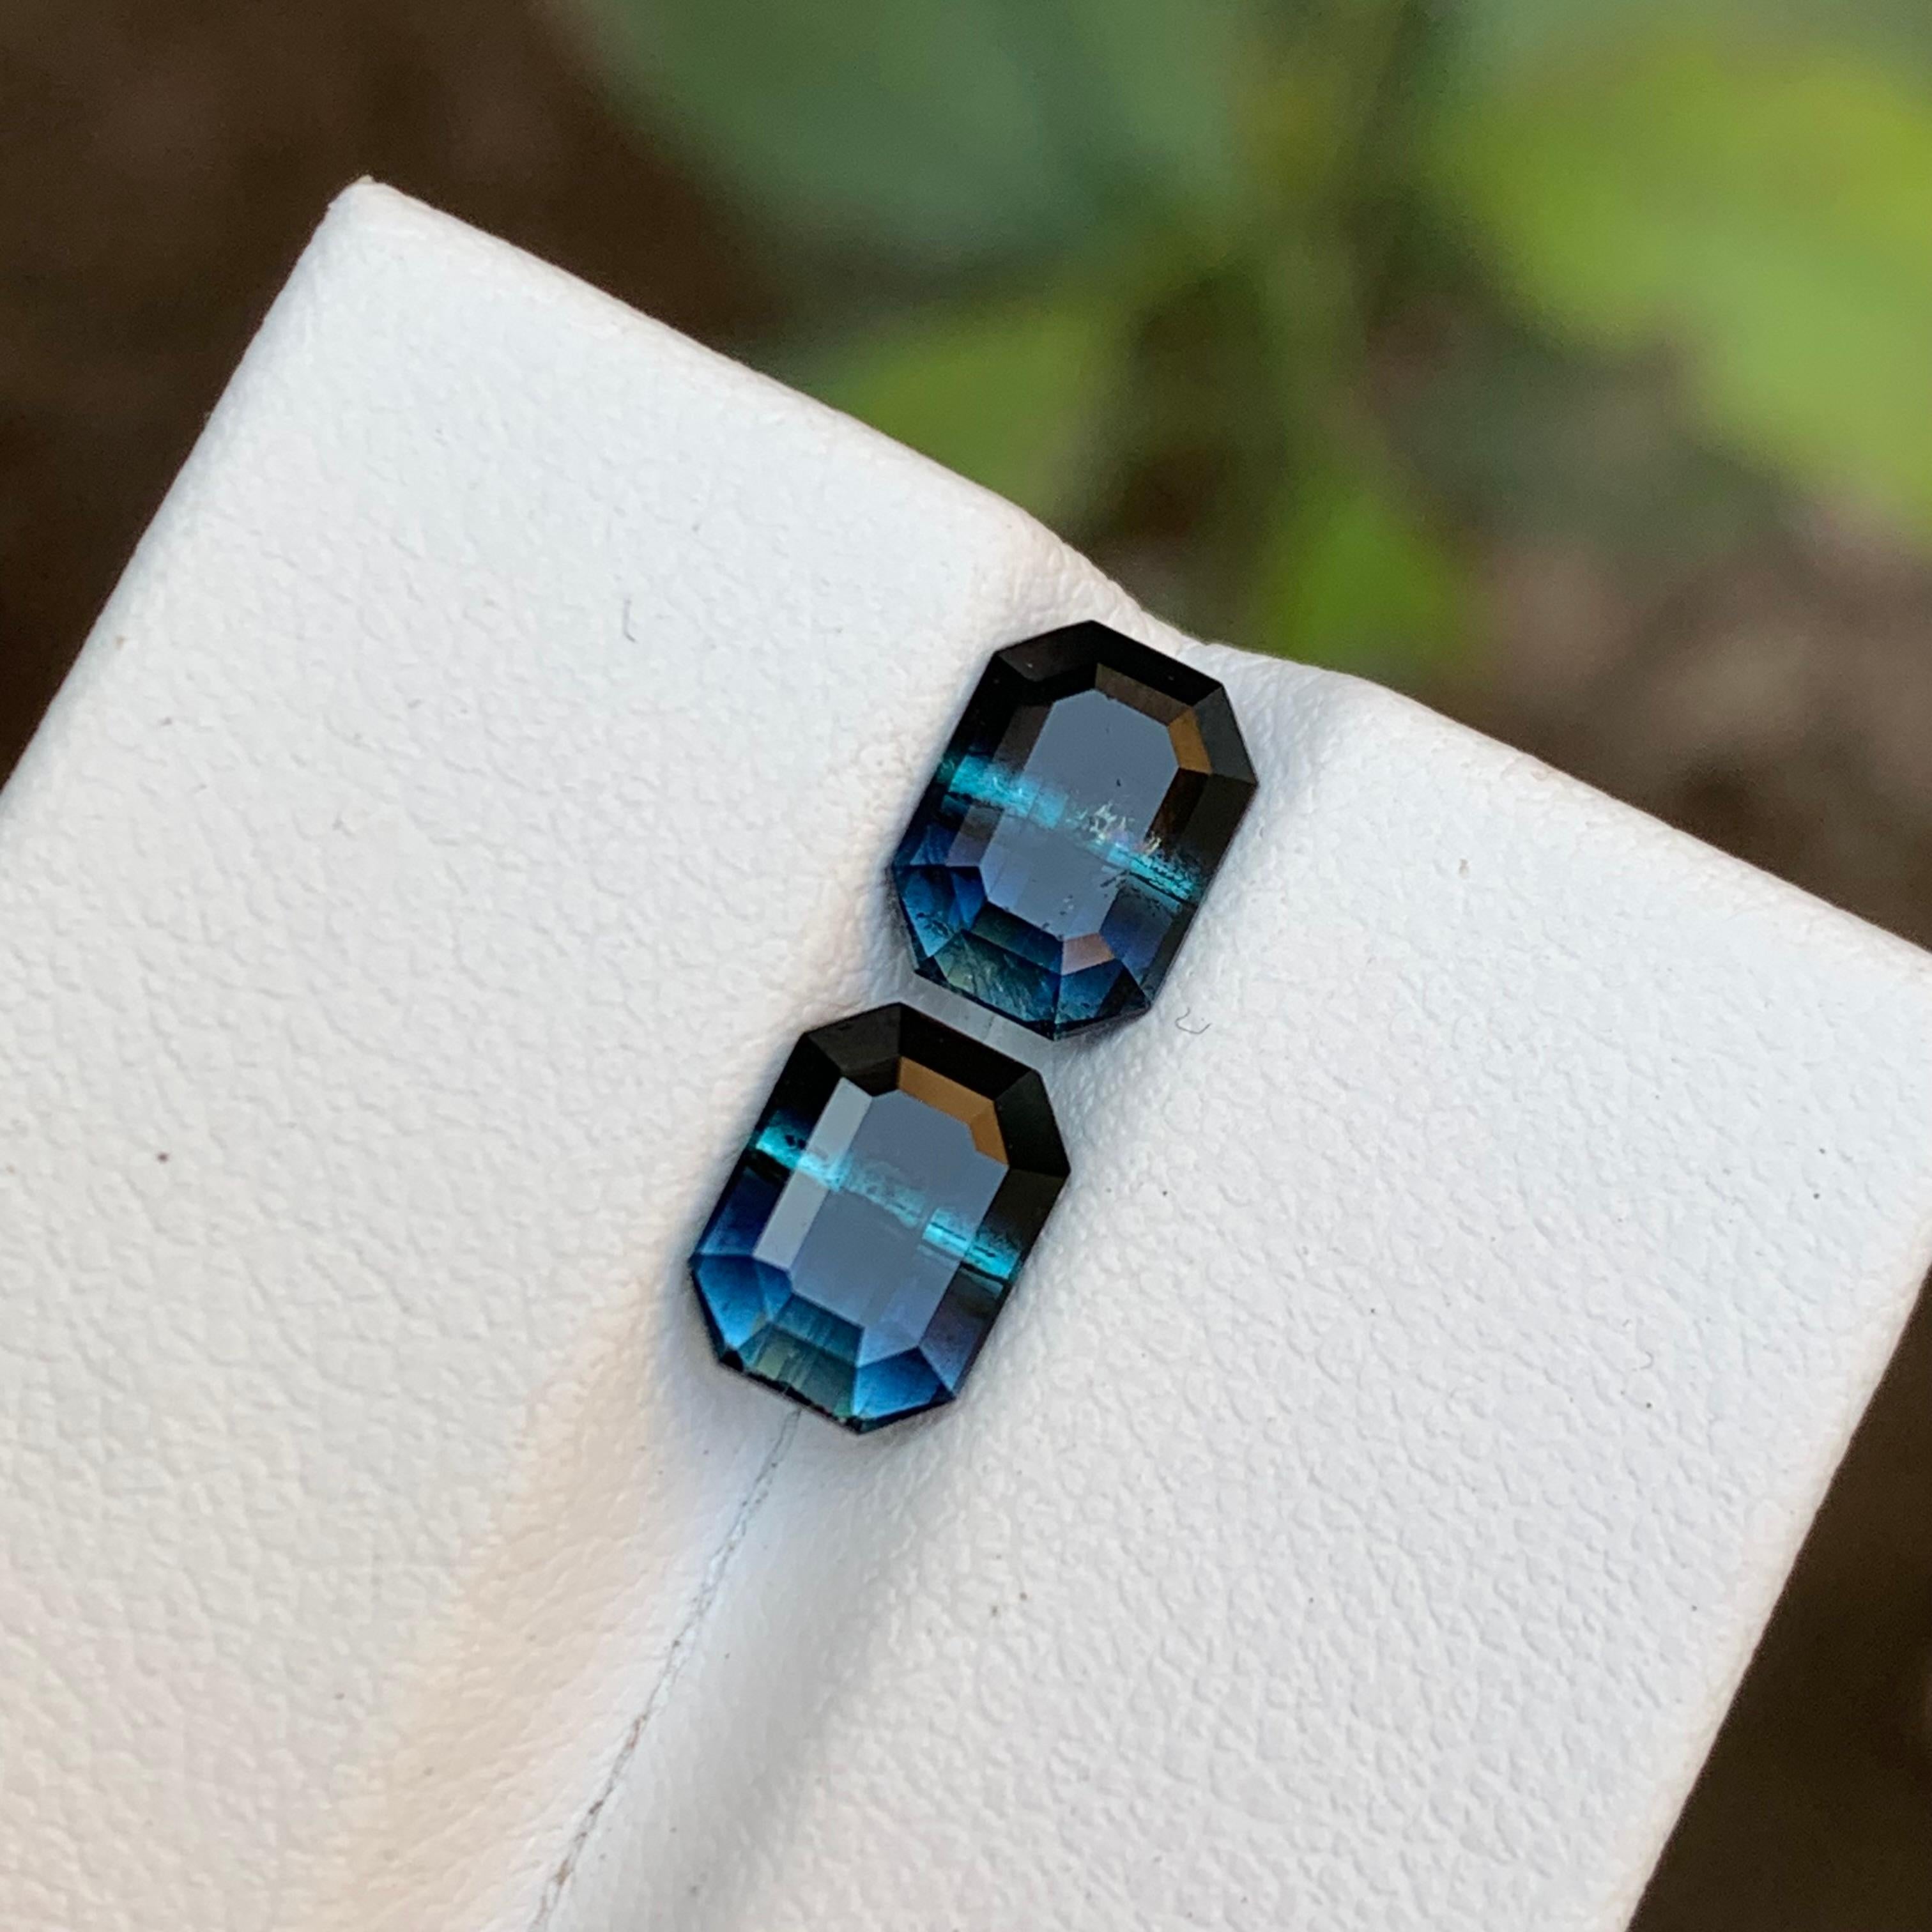 GEMSTONE TYPE: Tourmaline
PIECE(S): Pair
WEIGHT: 2.75 Carats
SHAPE: Emerald
SIZE (MM): 
1.35 Carat: 7.60 x 5.67 x 3.85
1.40 Carat: 7.56 x 5.63 x 3.94
COLOR: Bicolor Black and Blue
CLARITY: Slightly Included
TREATMENT: None
ORIGIN: